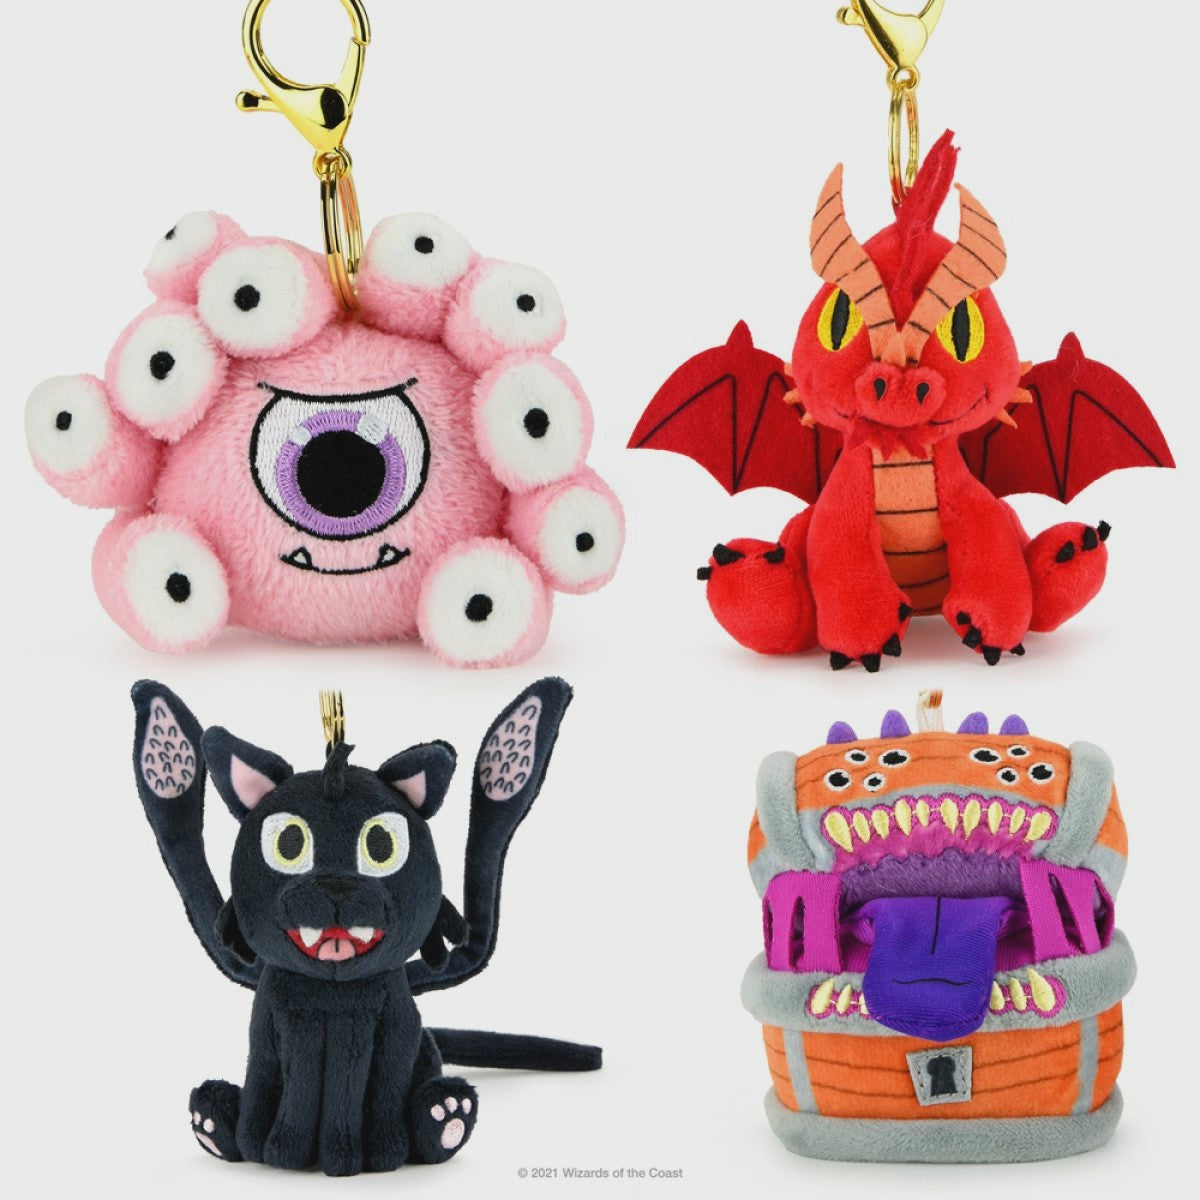 Dungeons and Dragons Plush Charms 3 Wave 1